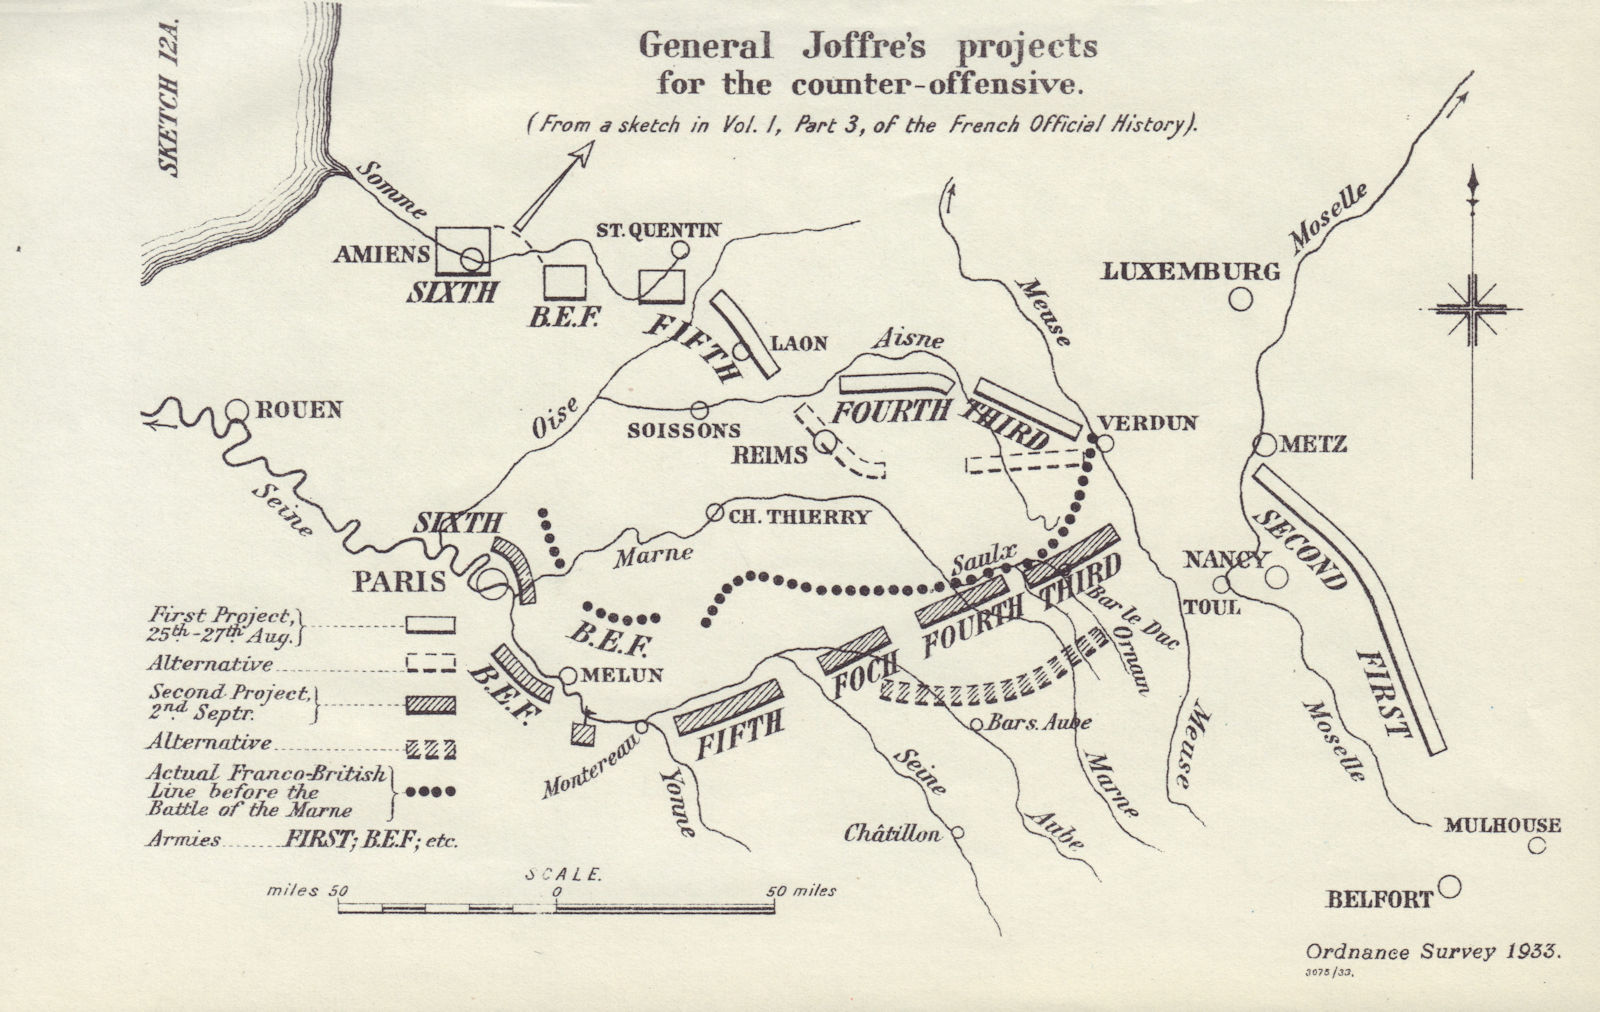 General Joffre's counter-offensive plans, 1914. Western Front. WW1. 1933 map